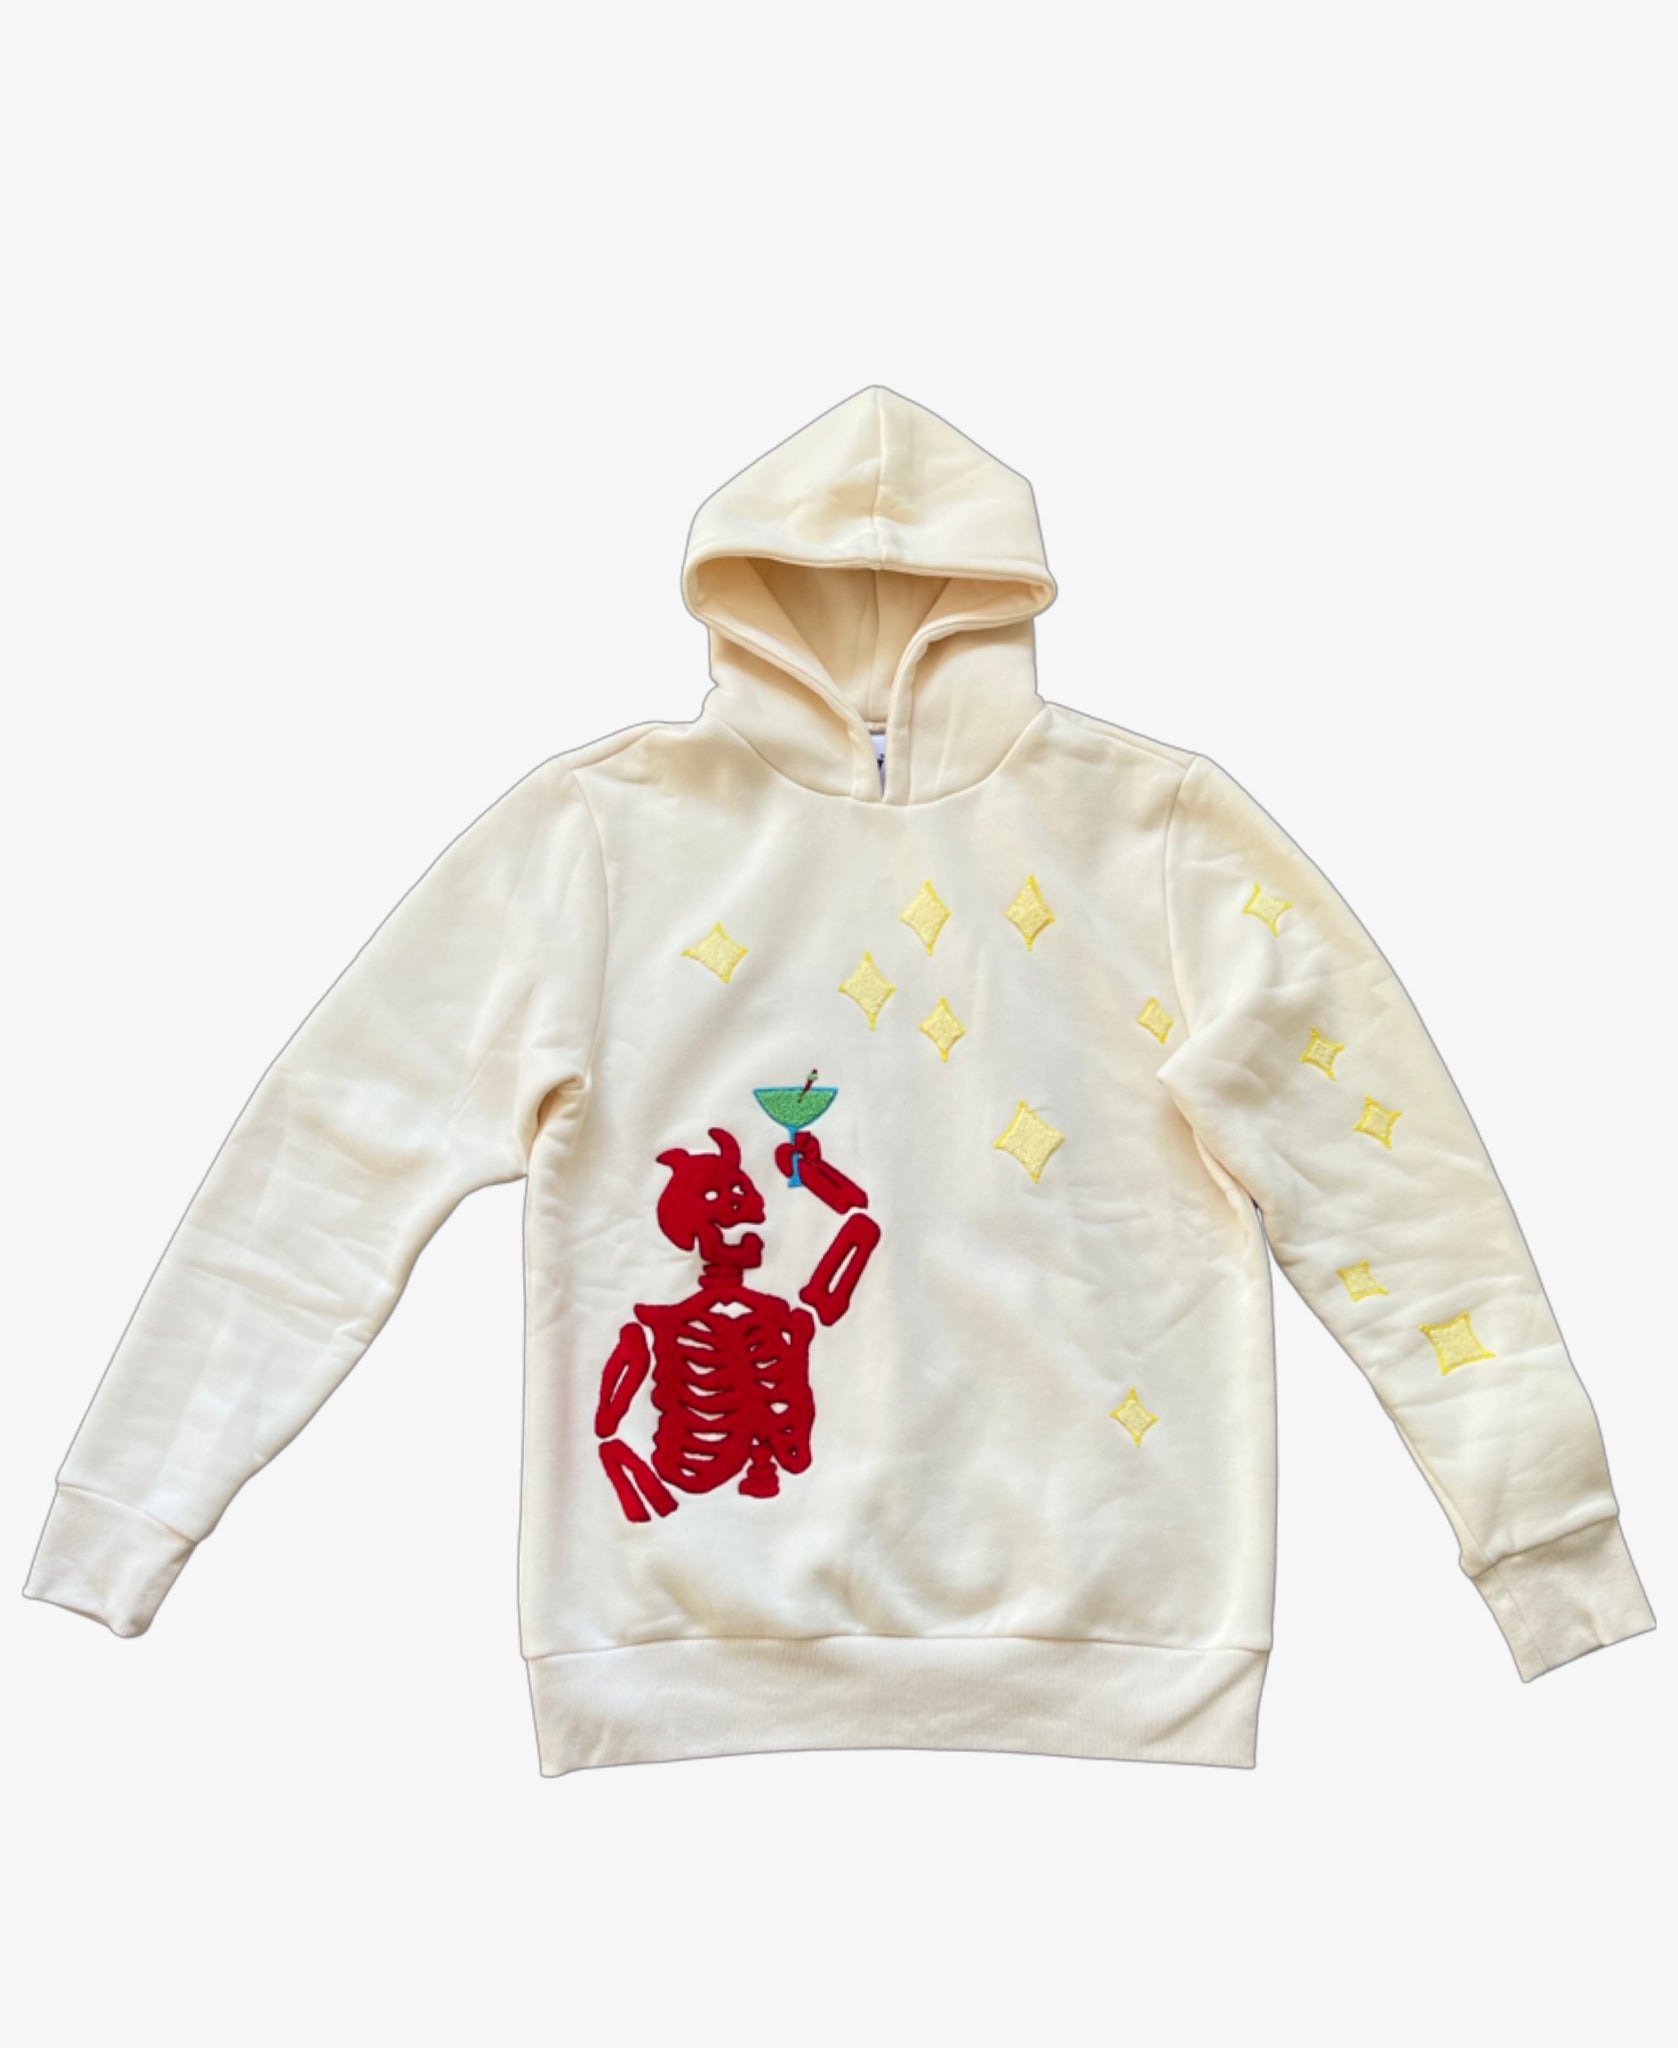 False Freedom - White and Red Skeleton Hoodie